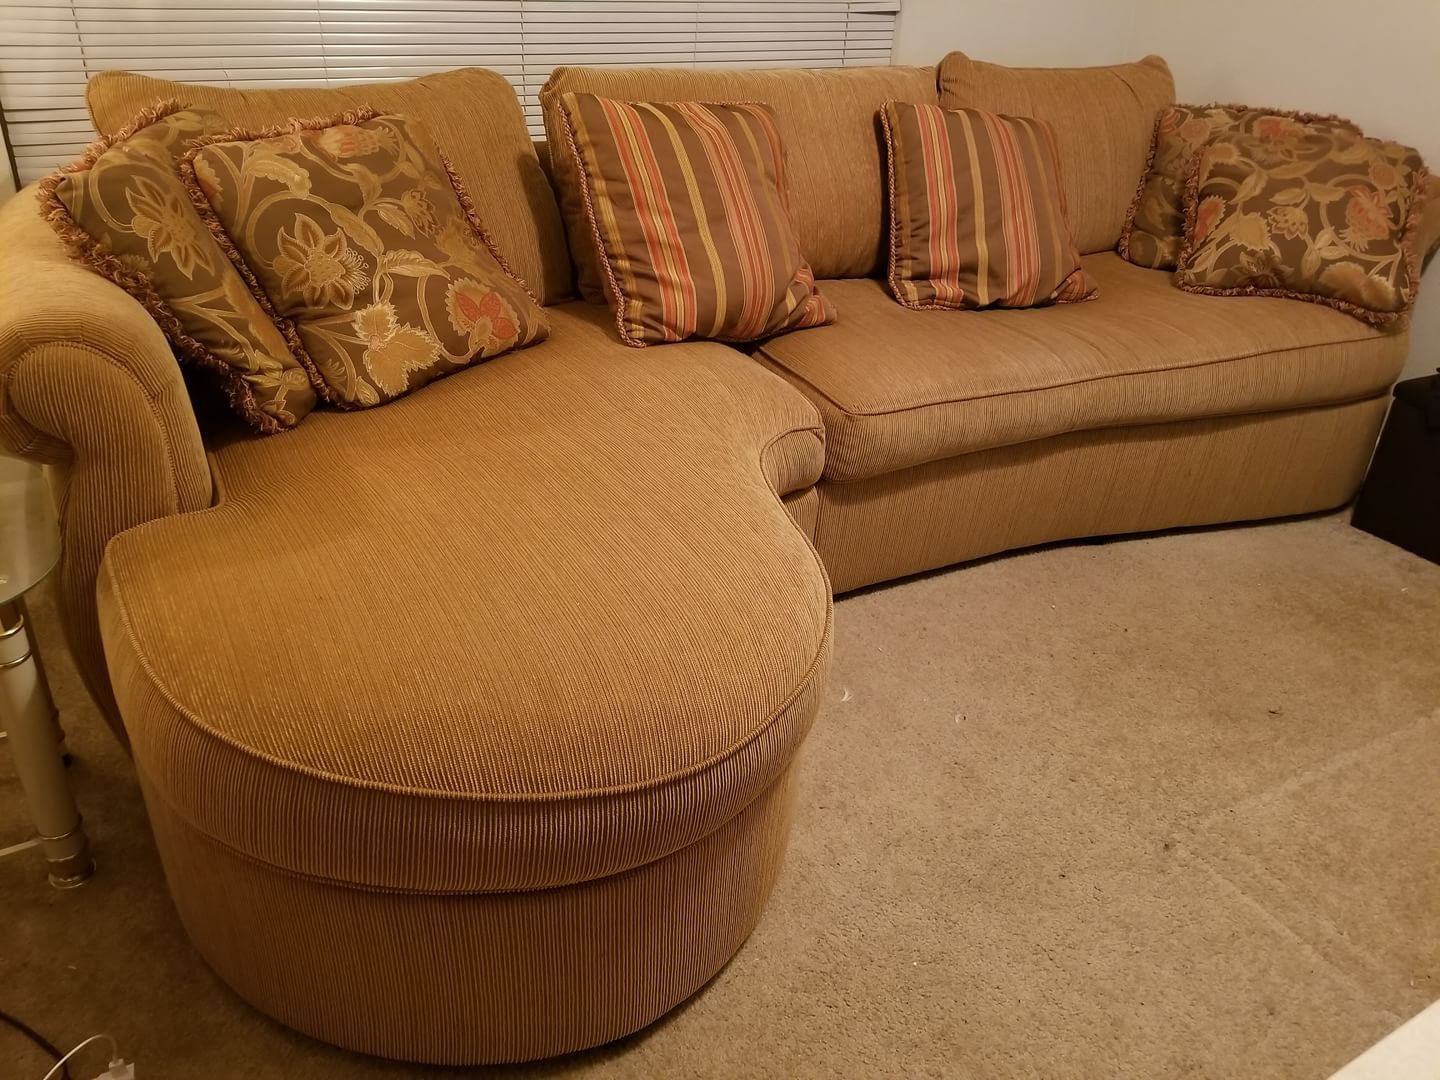 Couch for sale - $350